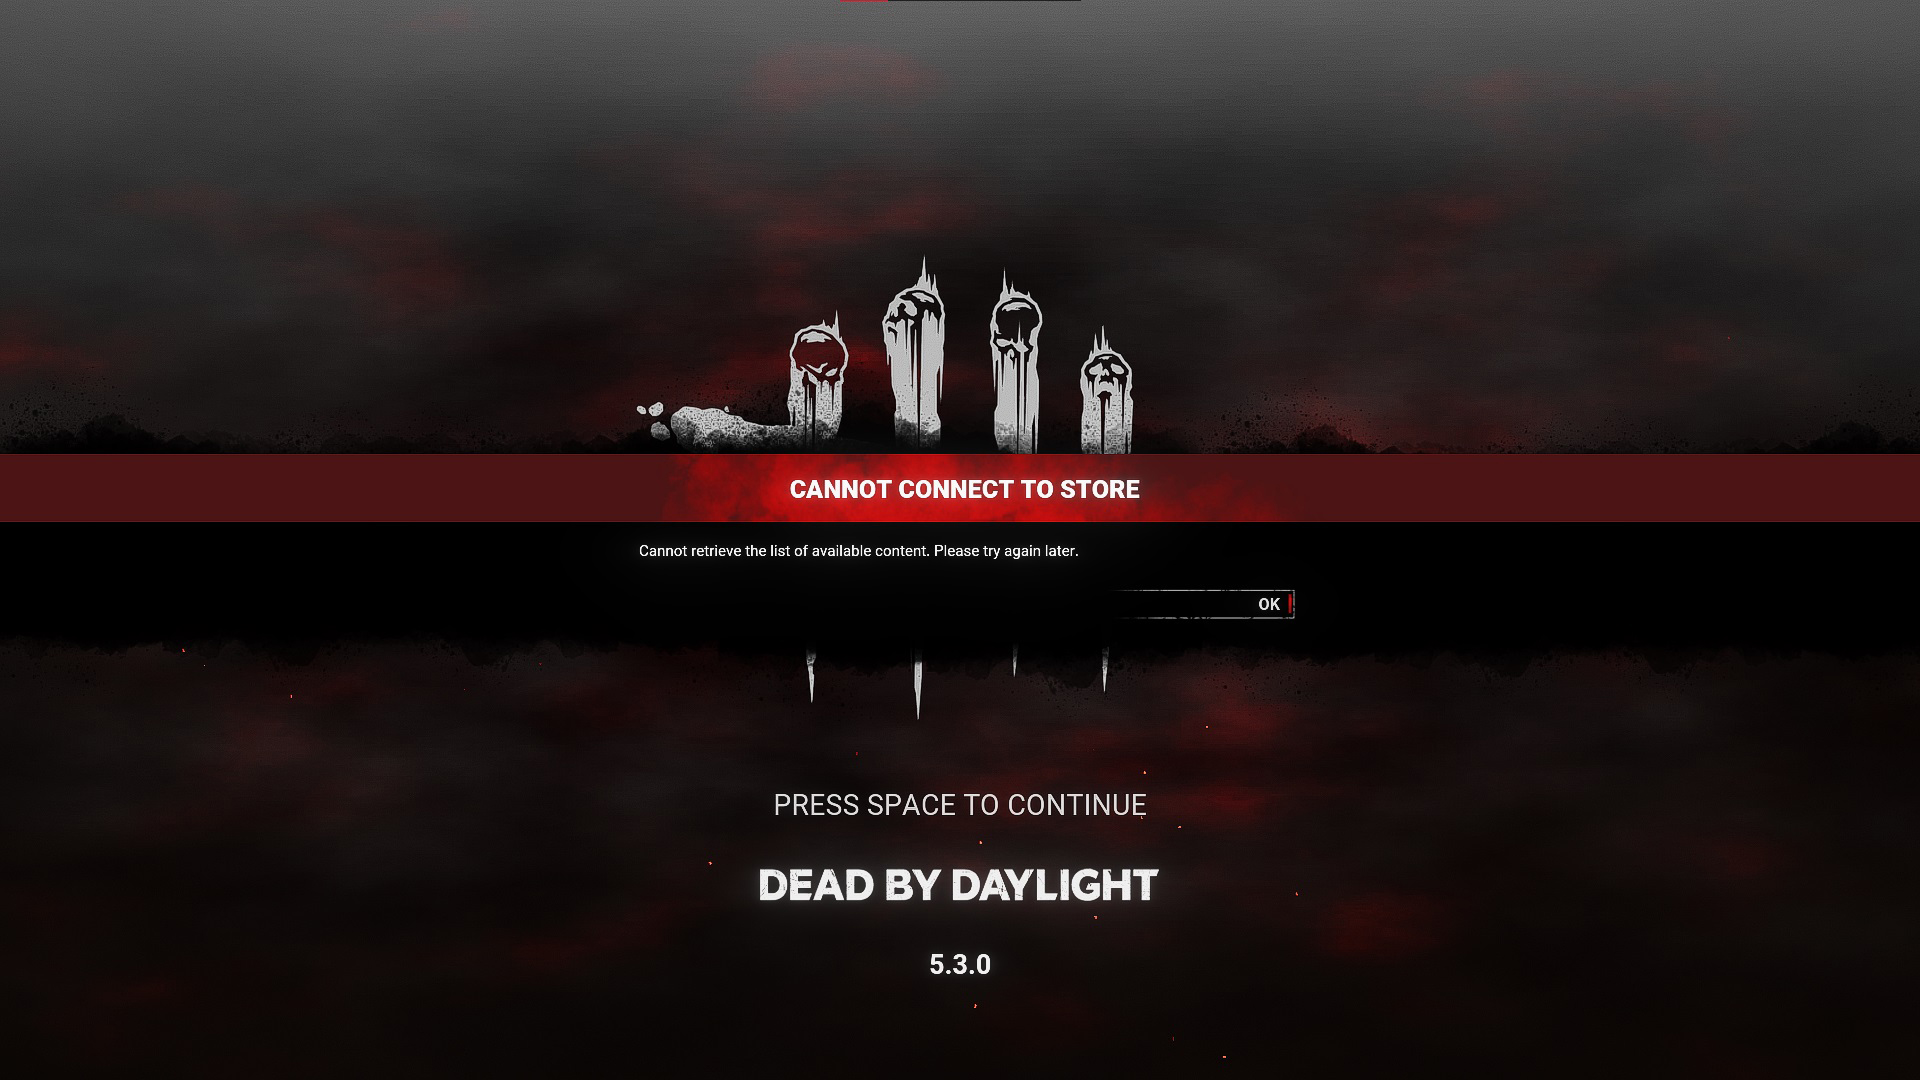 Dead by Daylight cannot connect to store